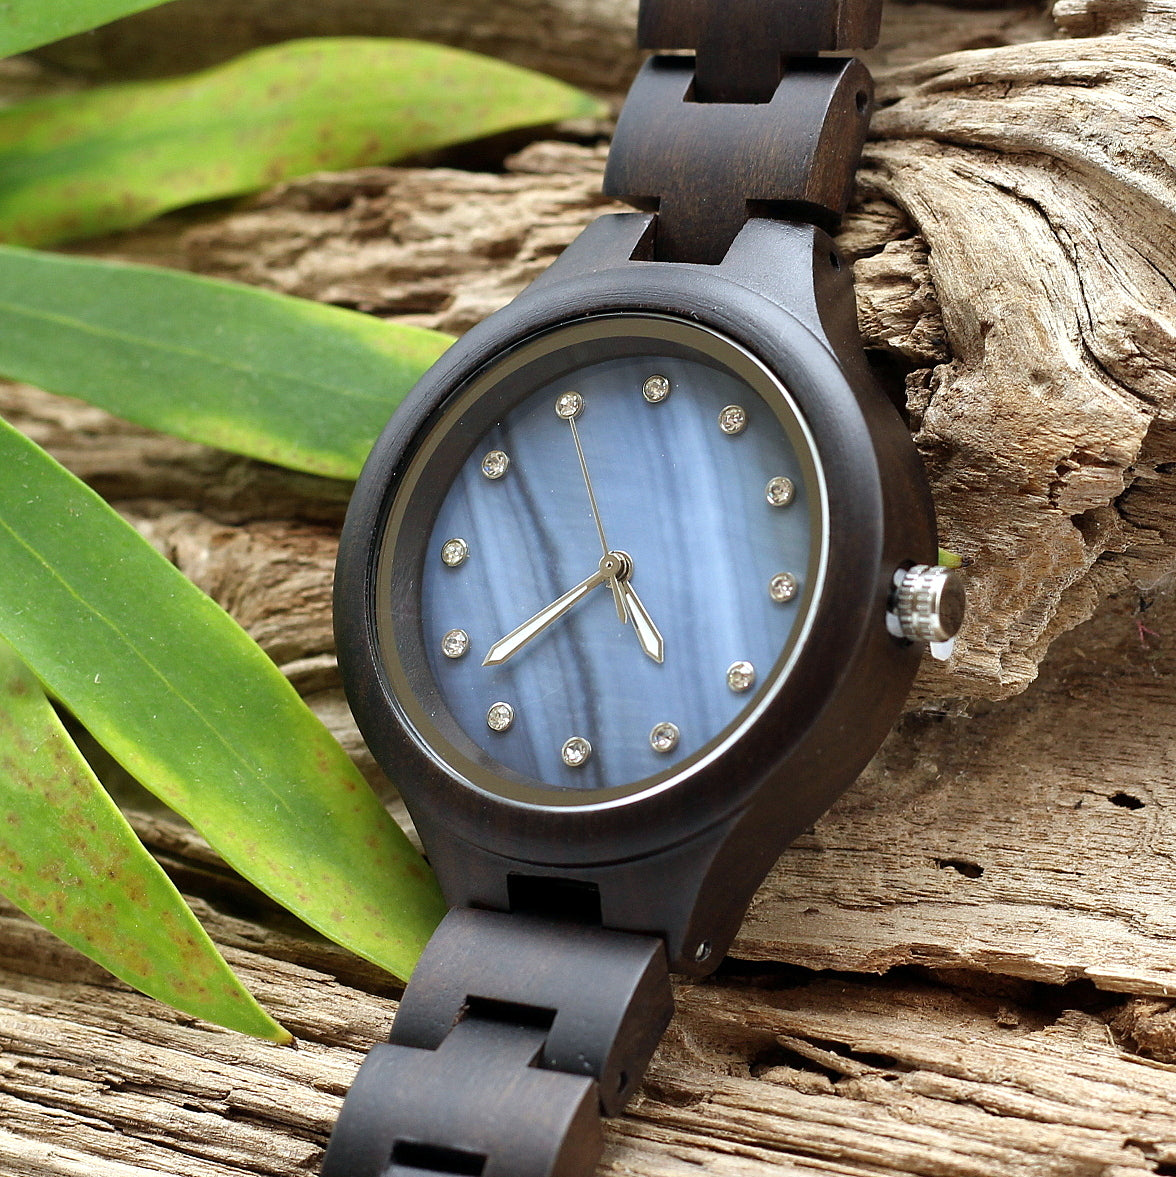 Ladies Wooden watch ebony wood with blue mother of pearl face and diamante watch face. Solid wooden strap with engraving option on the back.